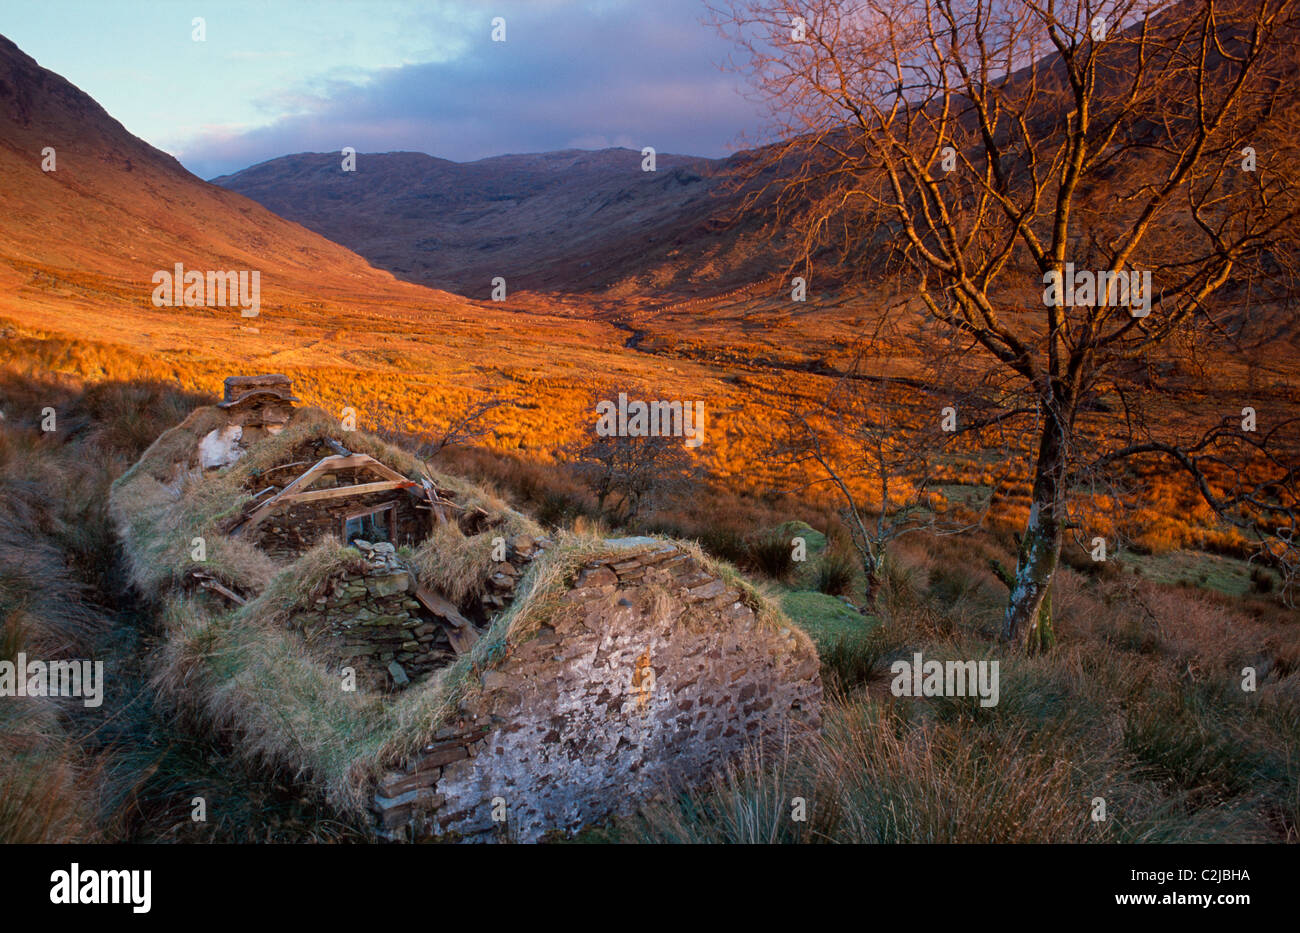 Einsame farm house in der Sruell Tal, Bluestack Mountains, County Donegal, Irland. Stockfoto